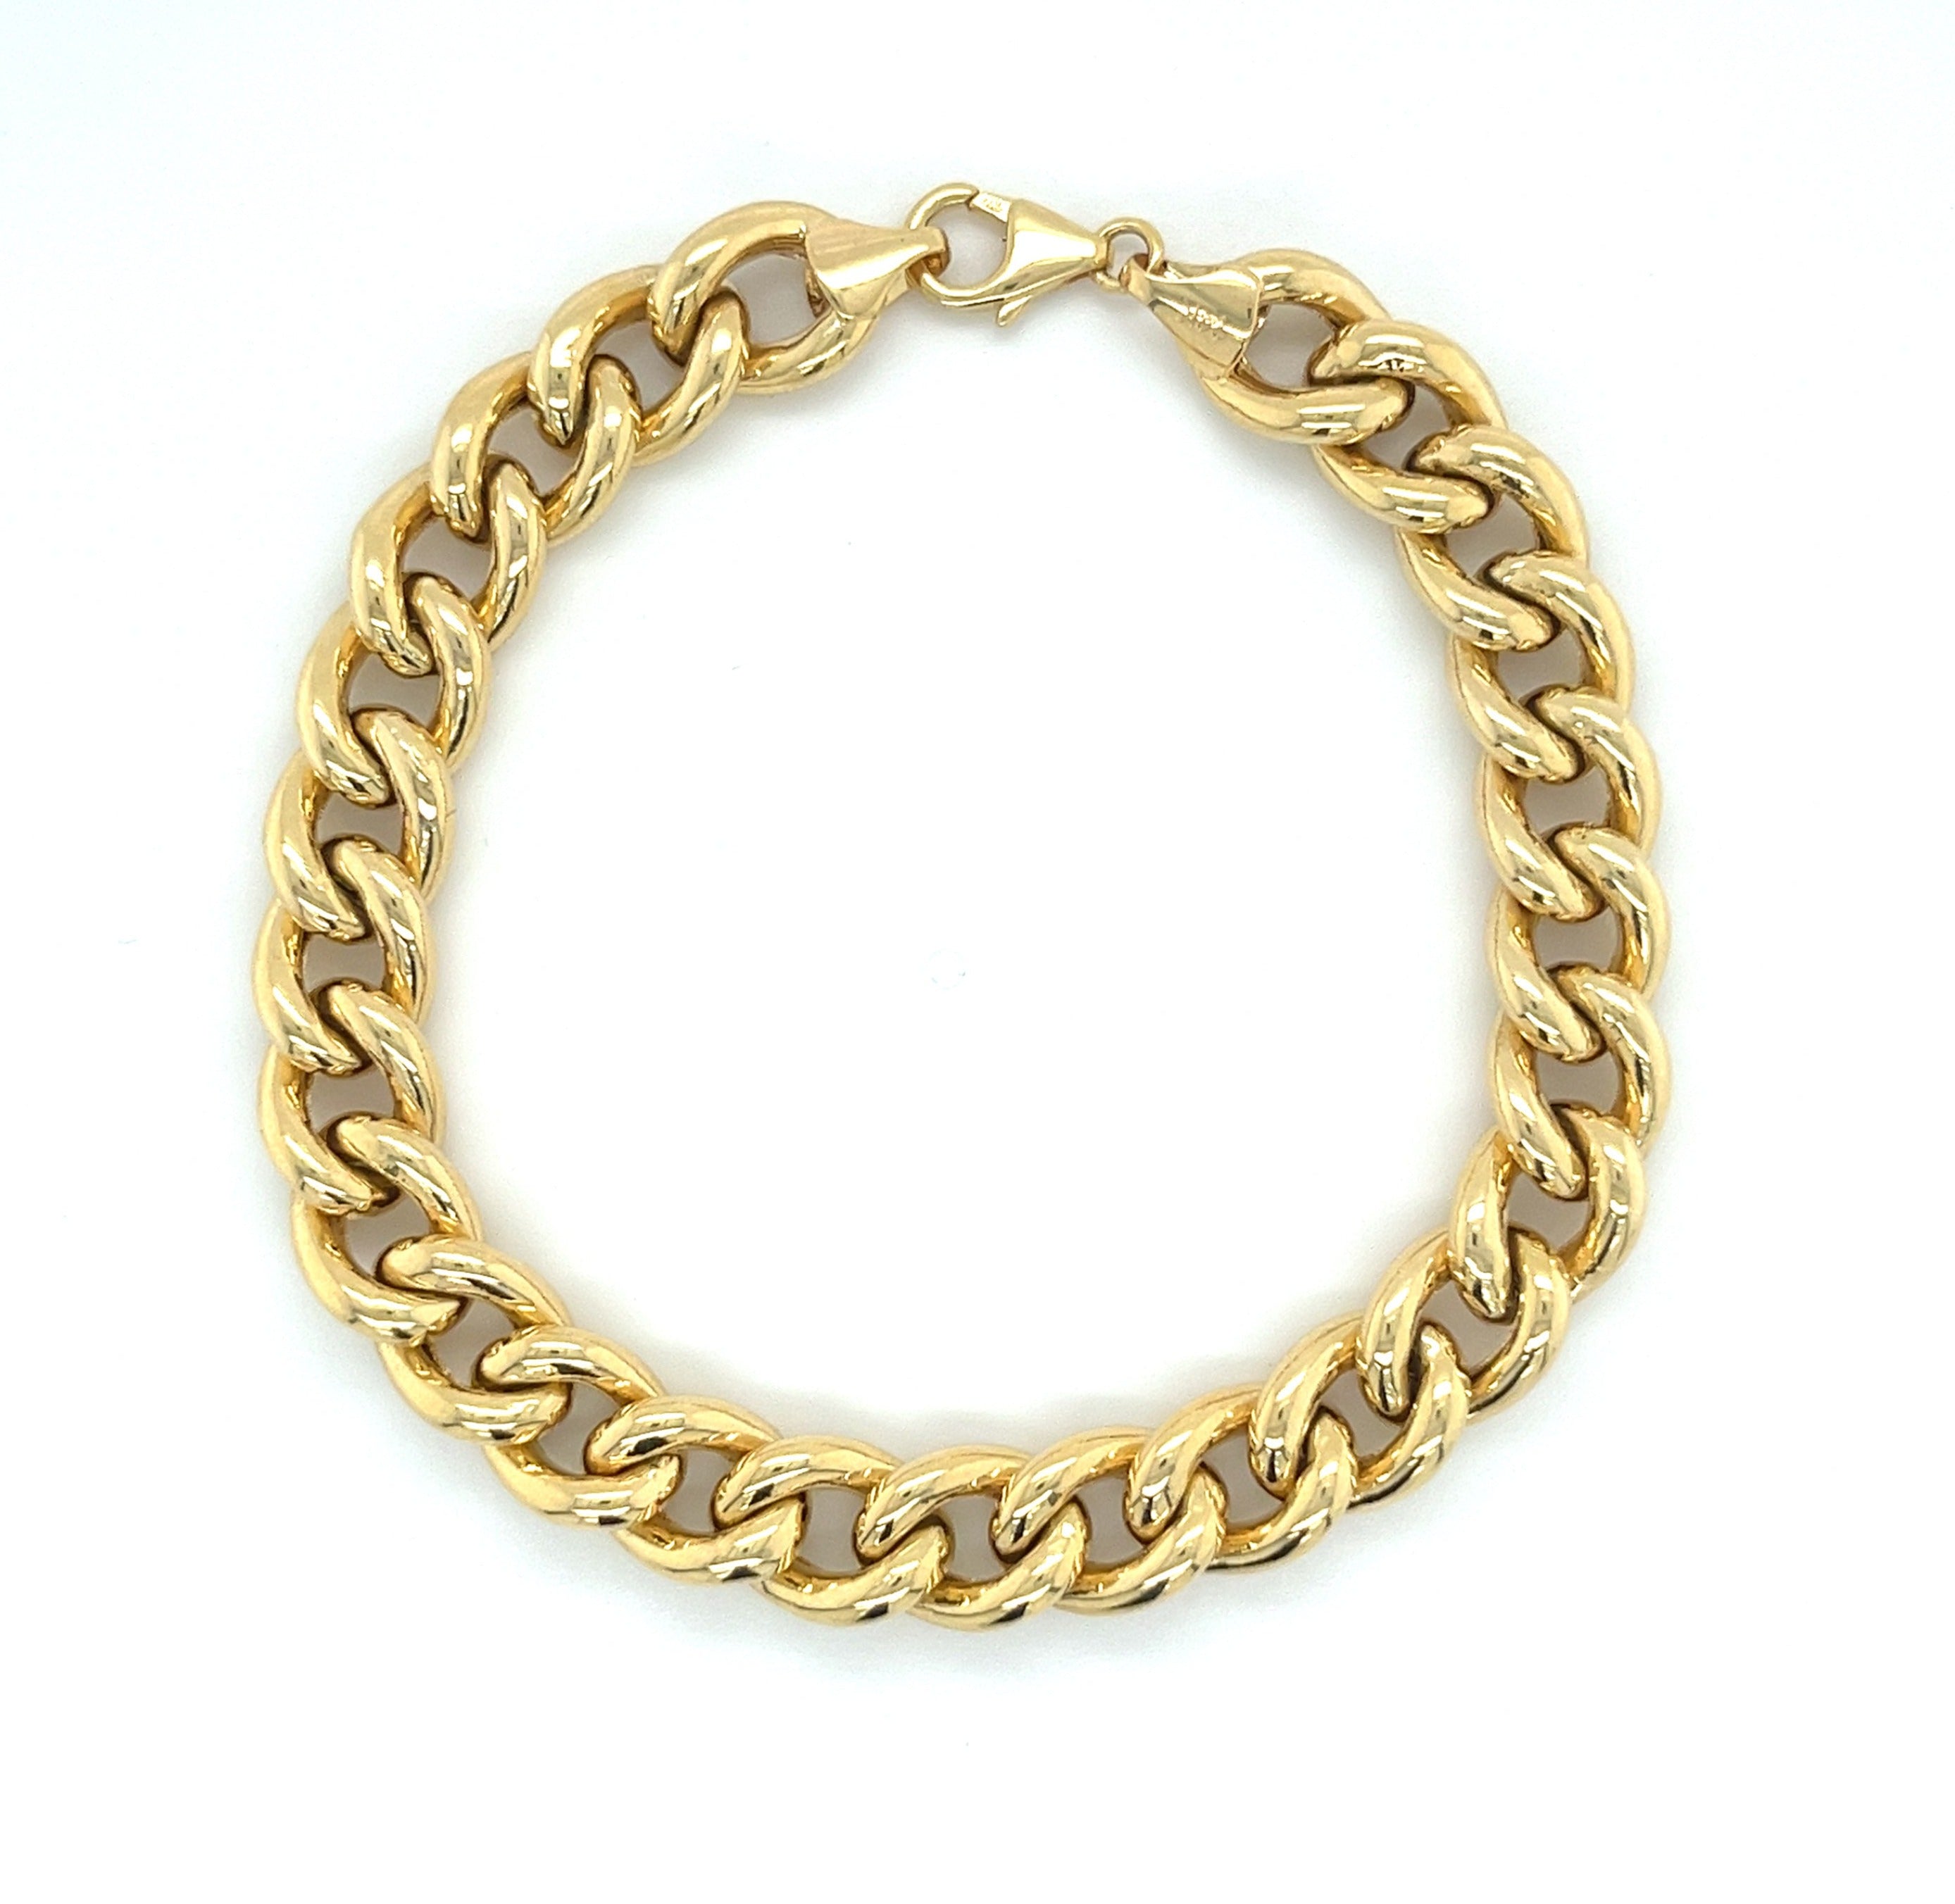 14K-Gold-Curb-Link-Chain-Mens-Bracelet-8_75MM-7_5-Inches-Chains.jpg